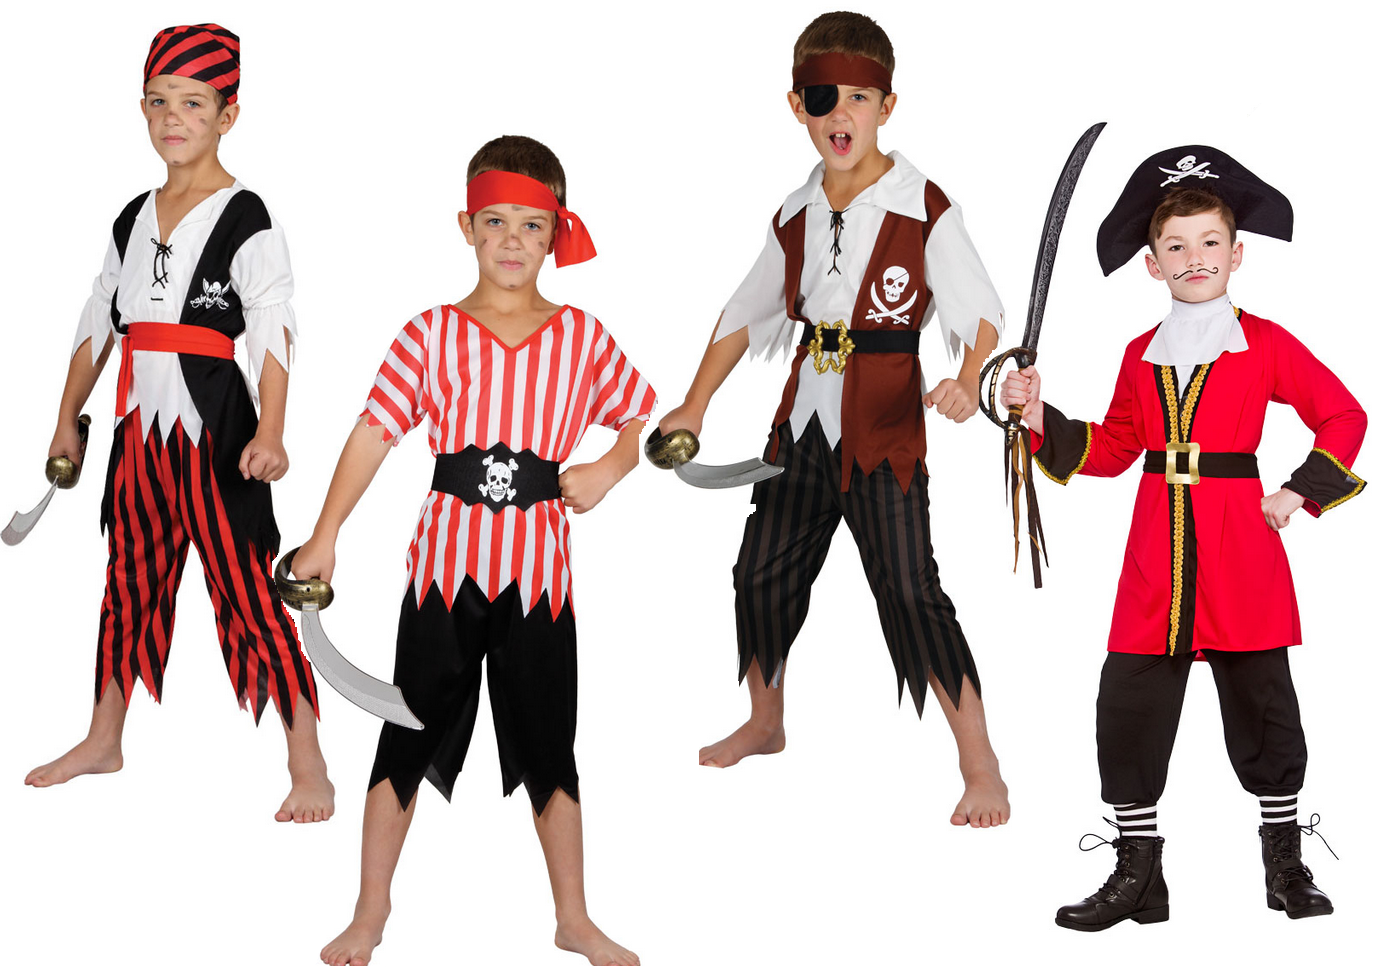 Boys Pirate Costumes - On New Promoted